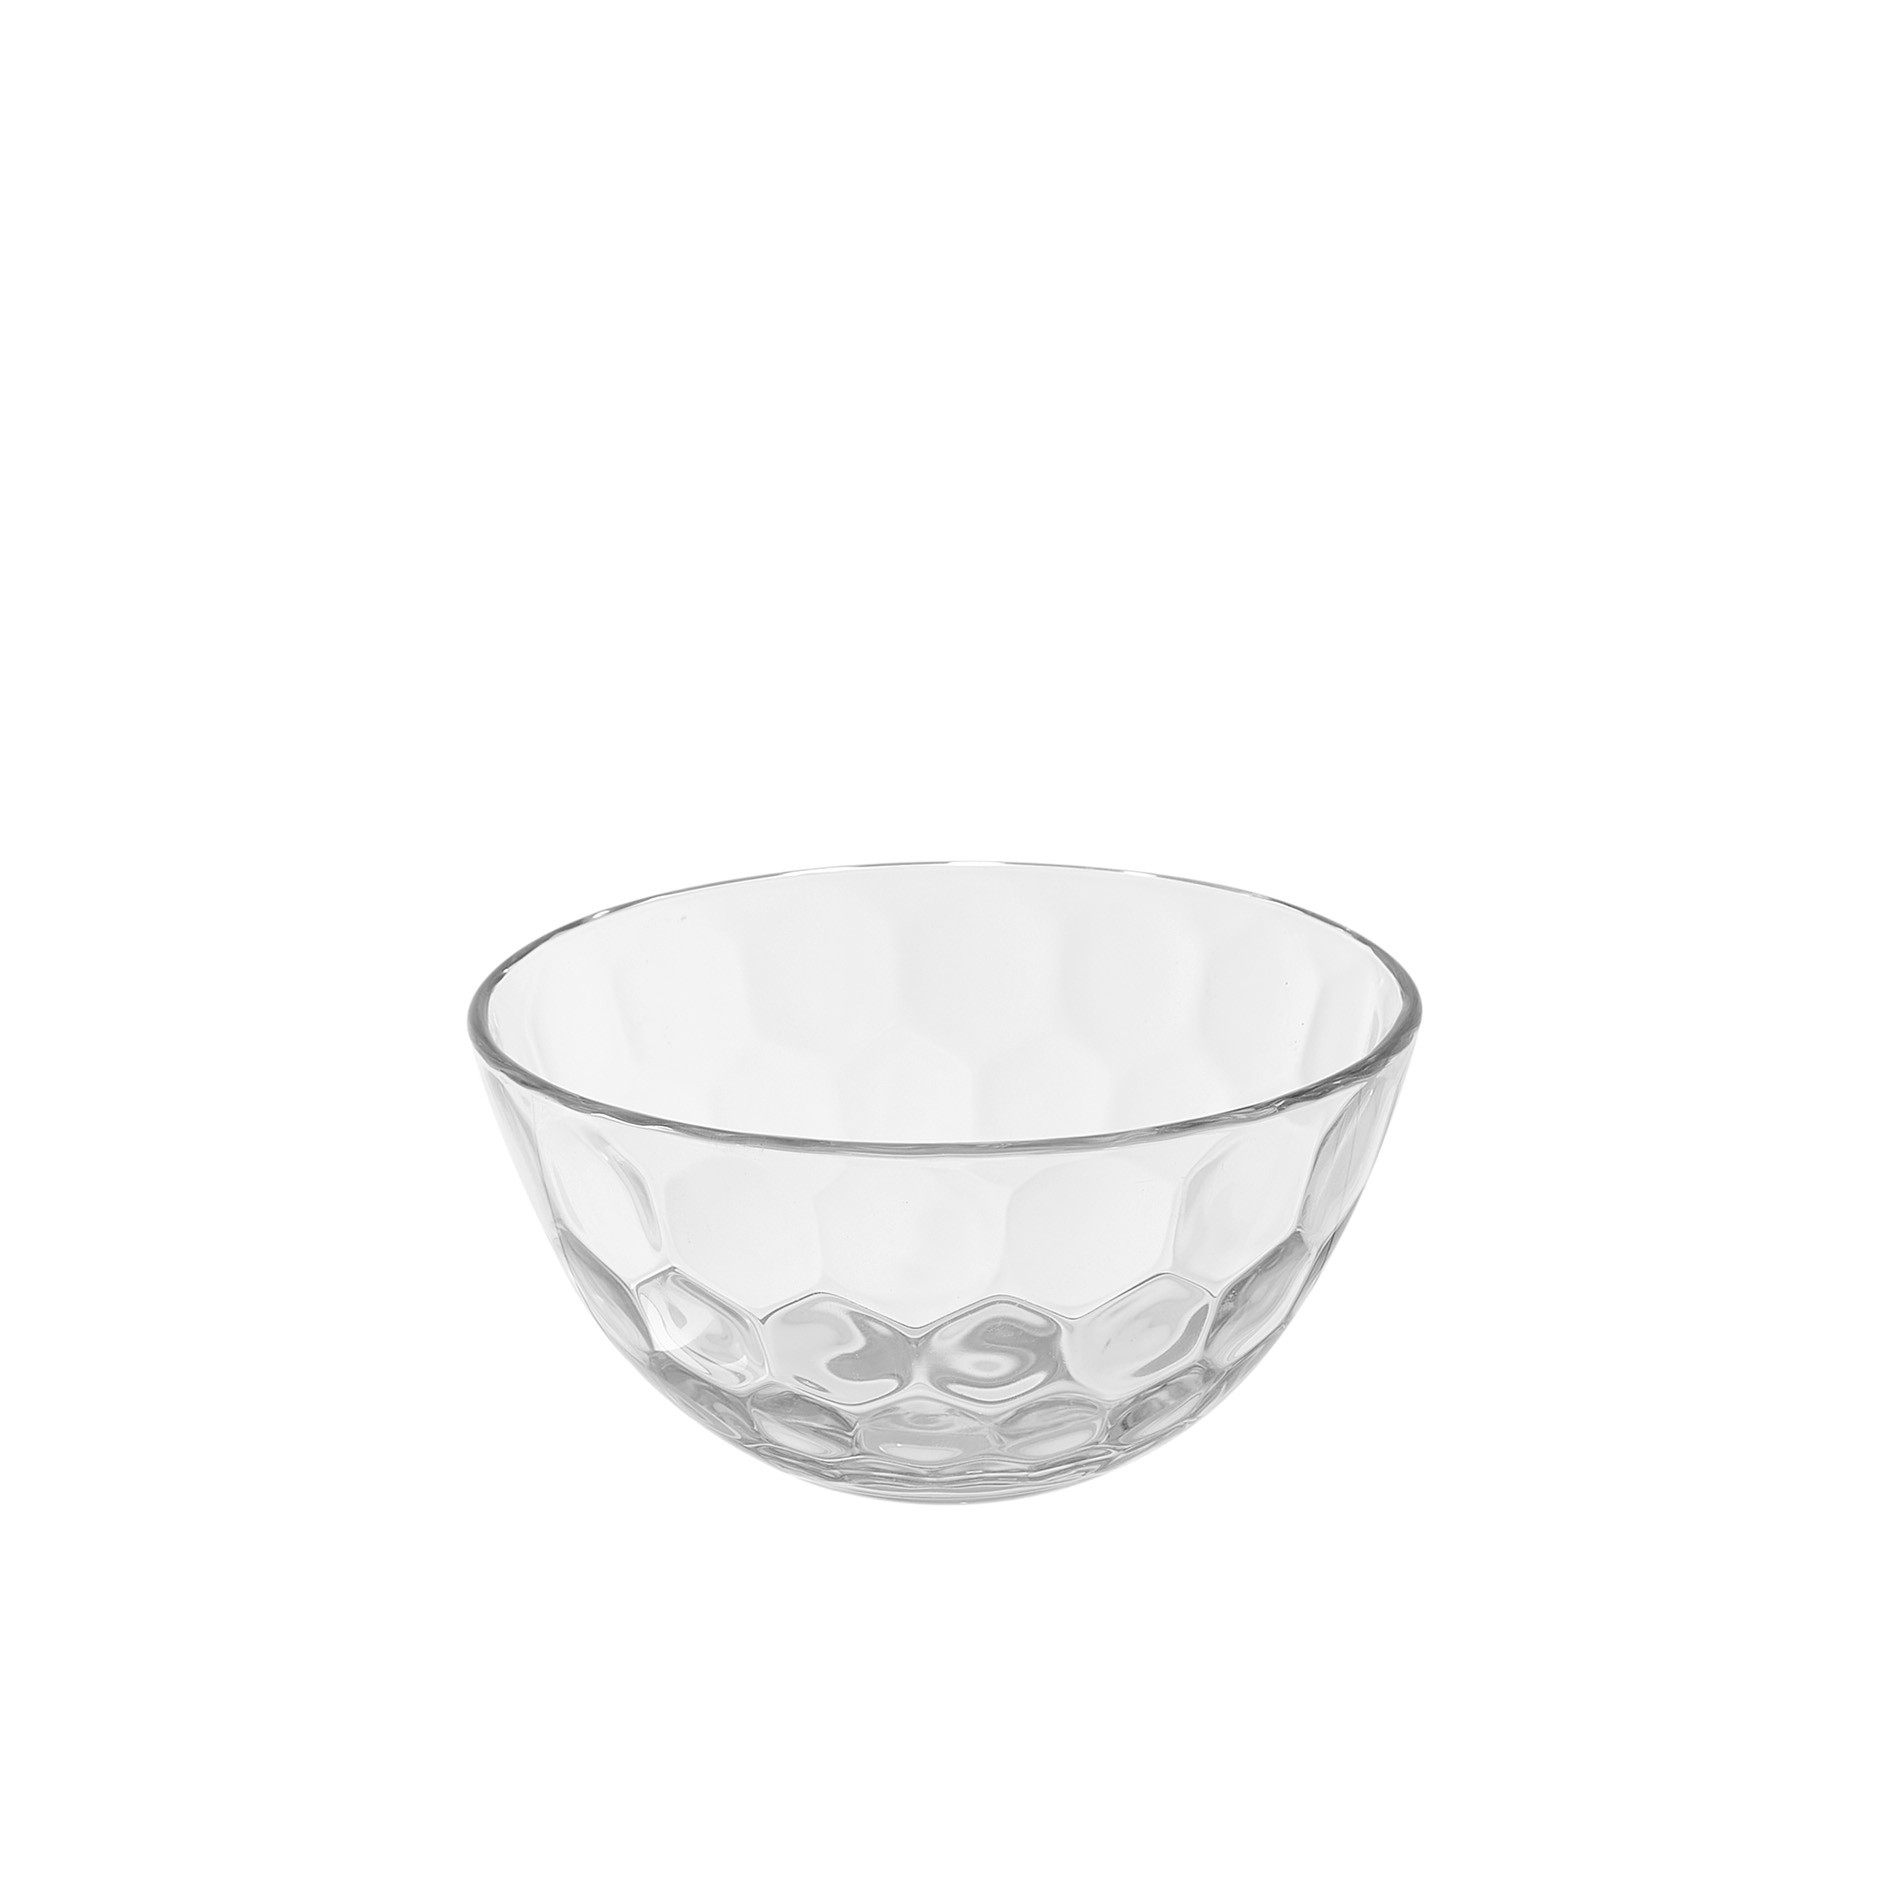 Honey small cut glass bowl, Transparent, large image number 0